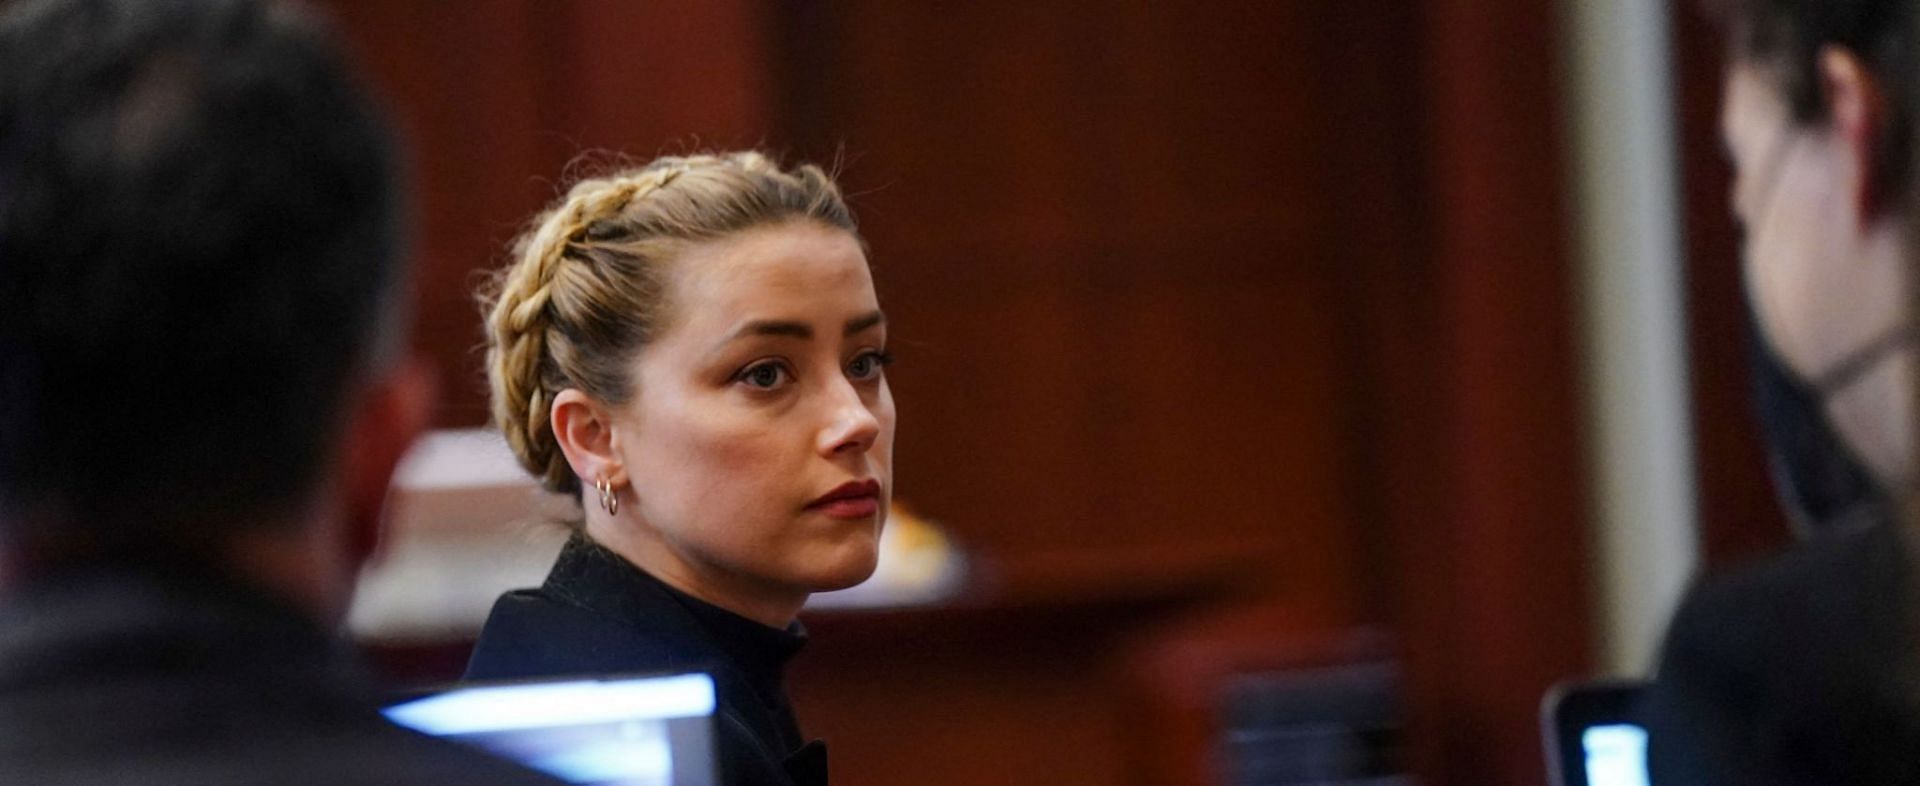 Amber Heard has been accused of being a &quot;verbally abusive&quot; boss by her former assistant Kate James (Image via Shawn Thew/Getty Images)